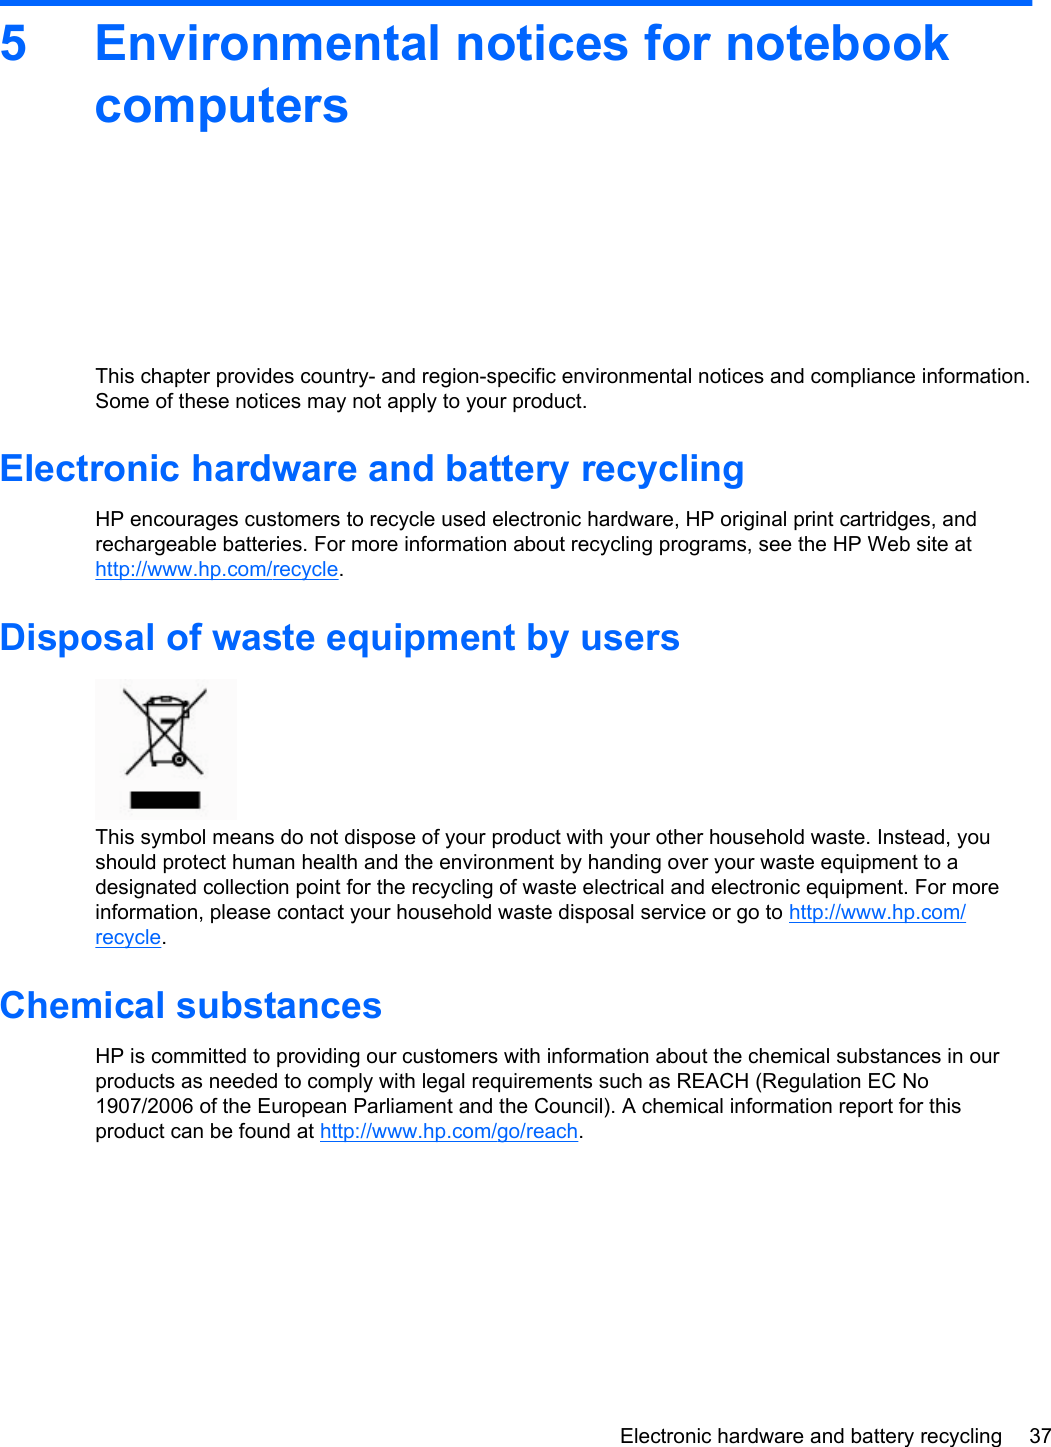 5 Environmental notices for notebookcomputersThis chapter provides country- and region-specific environmental notices and compliance information.Some of these notices may not apply to your product.Electronic hardware and battery recyclingHP encourages customers to recycle used electronic hardware, HP original print cartridges, andrechargeable batteries. For more information about recycling programs, see the HP Web site athttp://www.hp.com/recycle.Disposal of waste equipment by usersThis symbol means do not dispose of your product with your other household waste. Instead, youshould protect human health and the environment by handing over your waste equipment to adesignated collection point for the recycling of waste electrical and electronic equipment. For moreinformation, please contact your household waste disposal service or go to http://www.hp.com/recycle.Chemical substancesHP is committed to providing our customers with information about the chemical substances in ourproducts as needed to comply with legal requirements such as REACH (Regulation EC No1907/2006 of the European Parliament and the Council). A chemical information report for thisproduct can be found at http://www.hp.com/go/reach.Electronic hardware and battery recycling 37